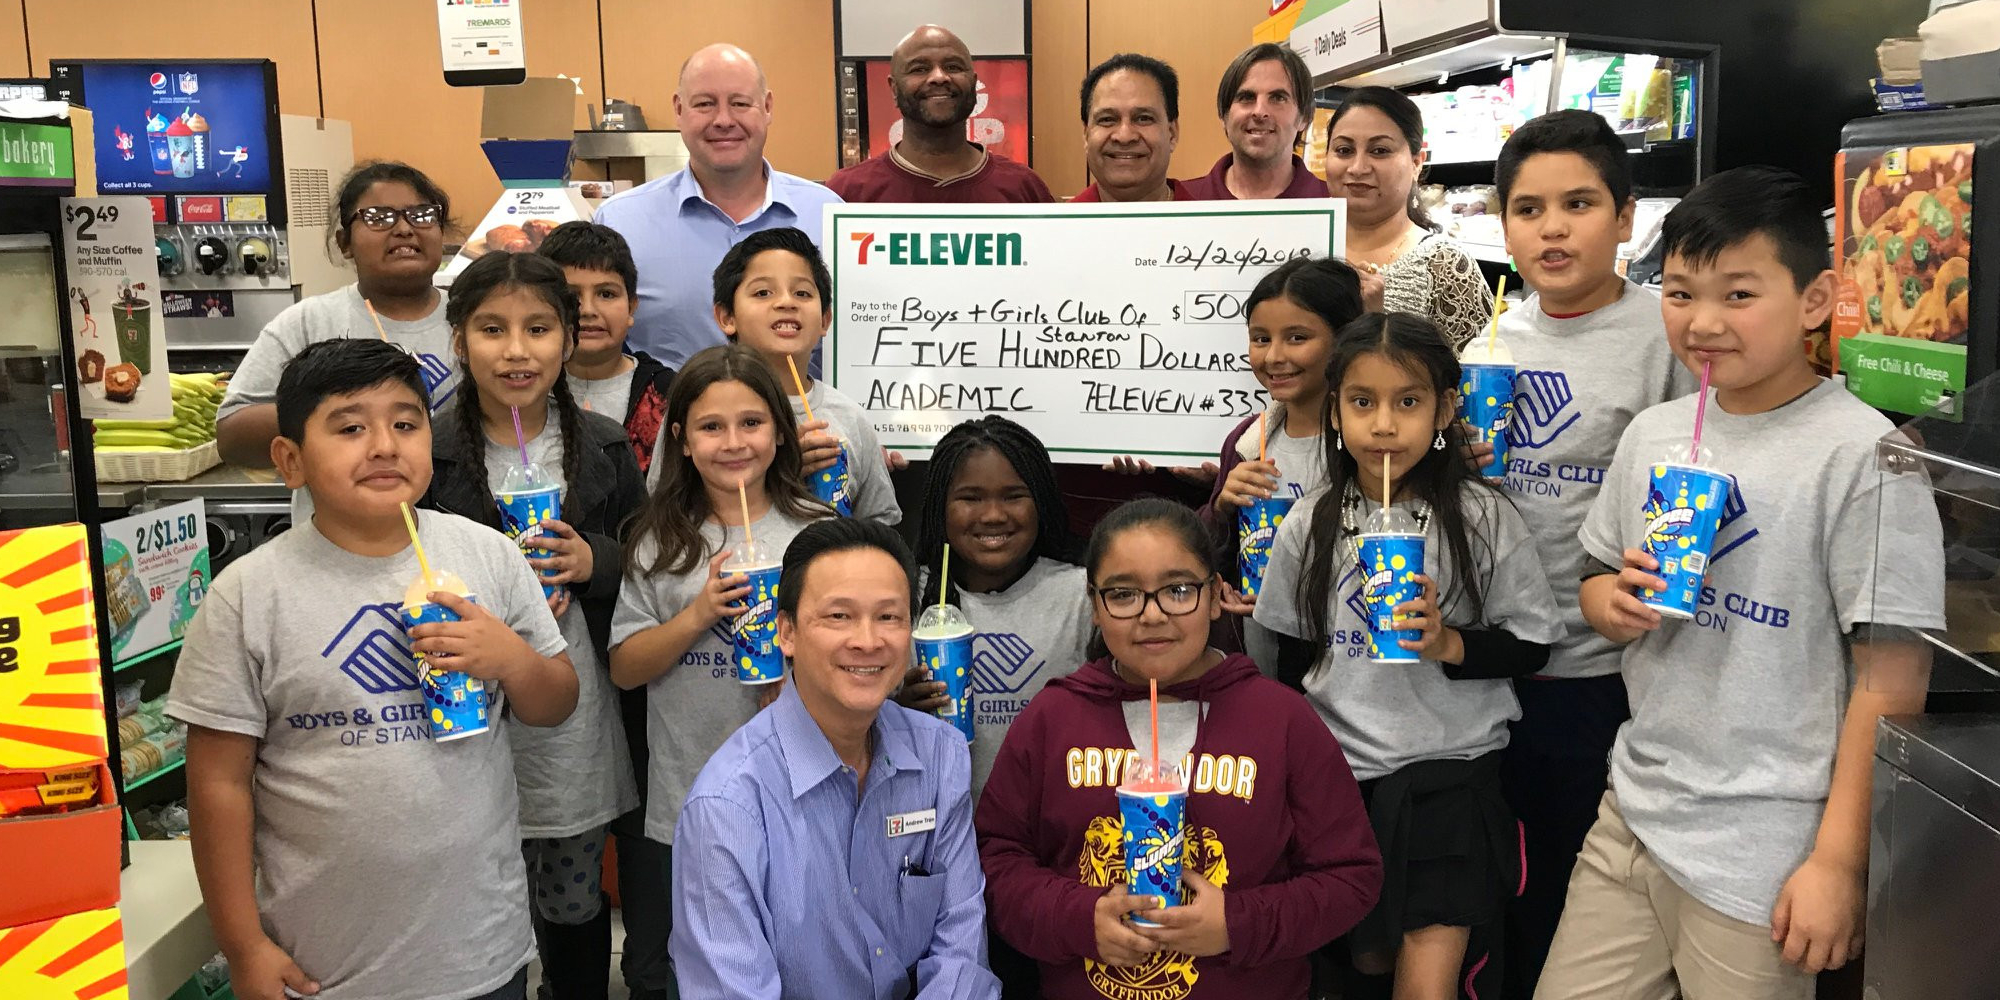 Group of students at 7-eleven holding a large $500 dollar check